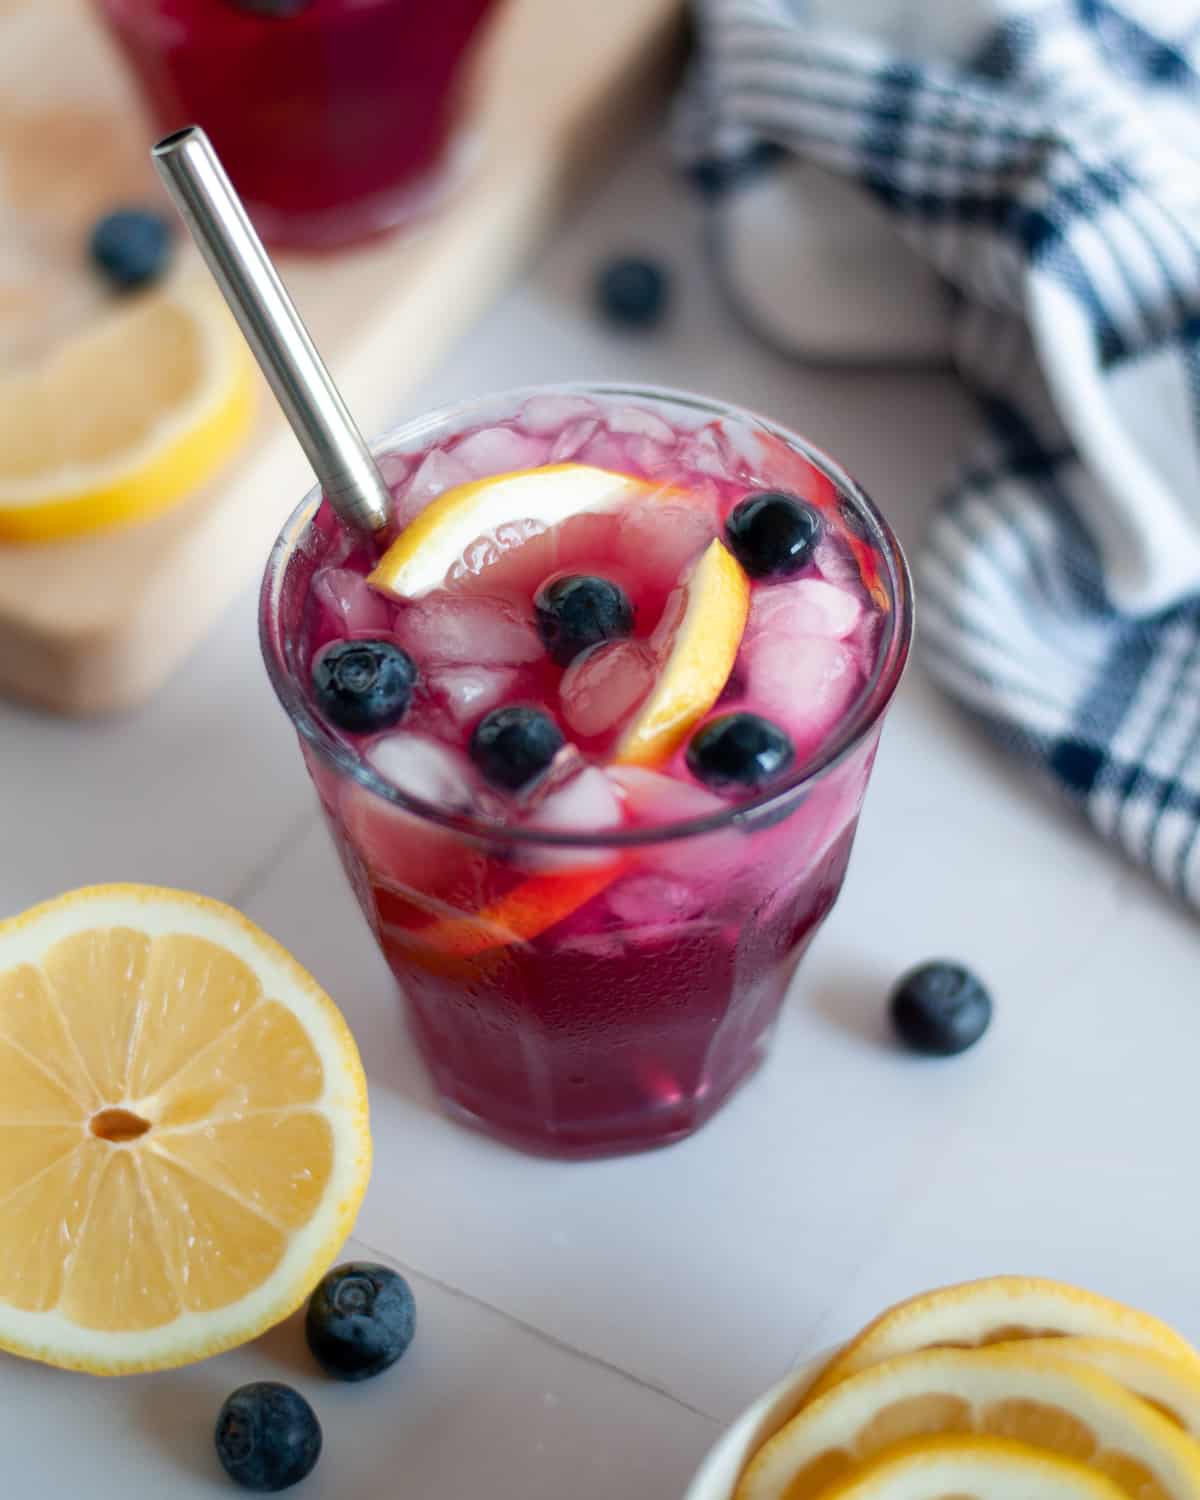 Blueberry Vodka Lemonade in a lowball glass, garnished with fresh blueberries and lemon slices. The glass is surrounded by ice, blueberries, lemon wheels, and a blue and white checkered linen.